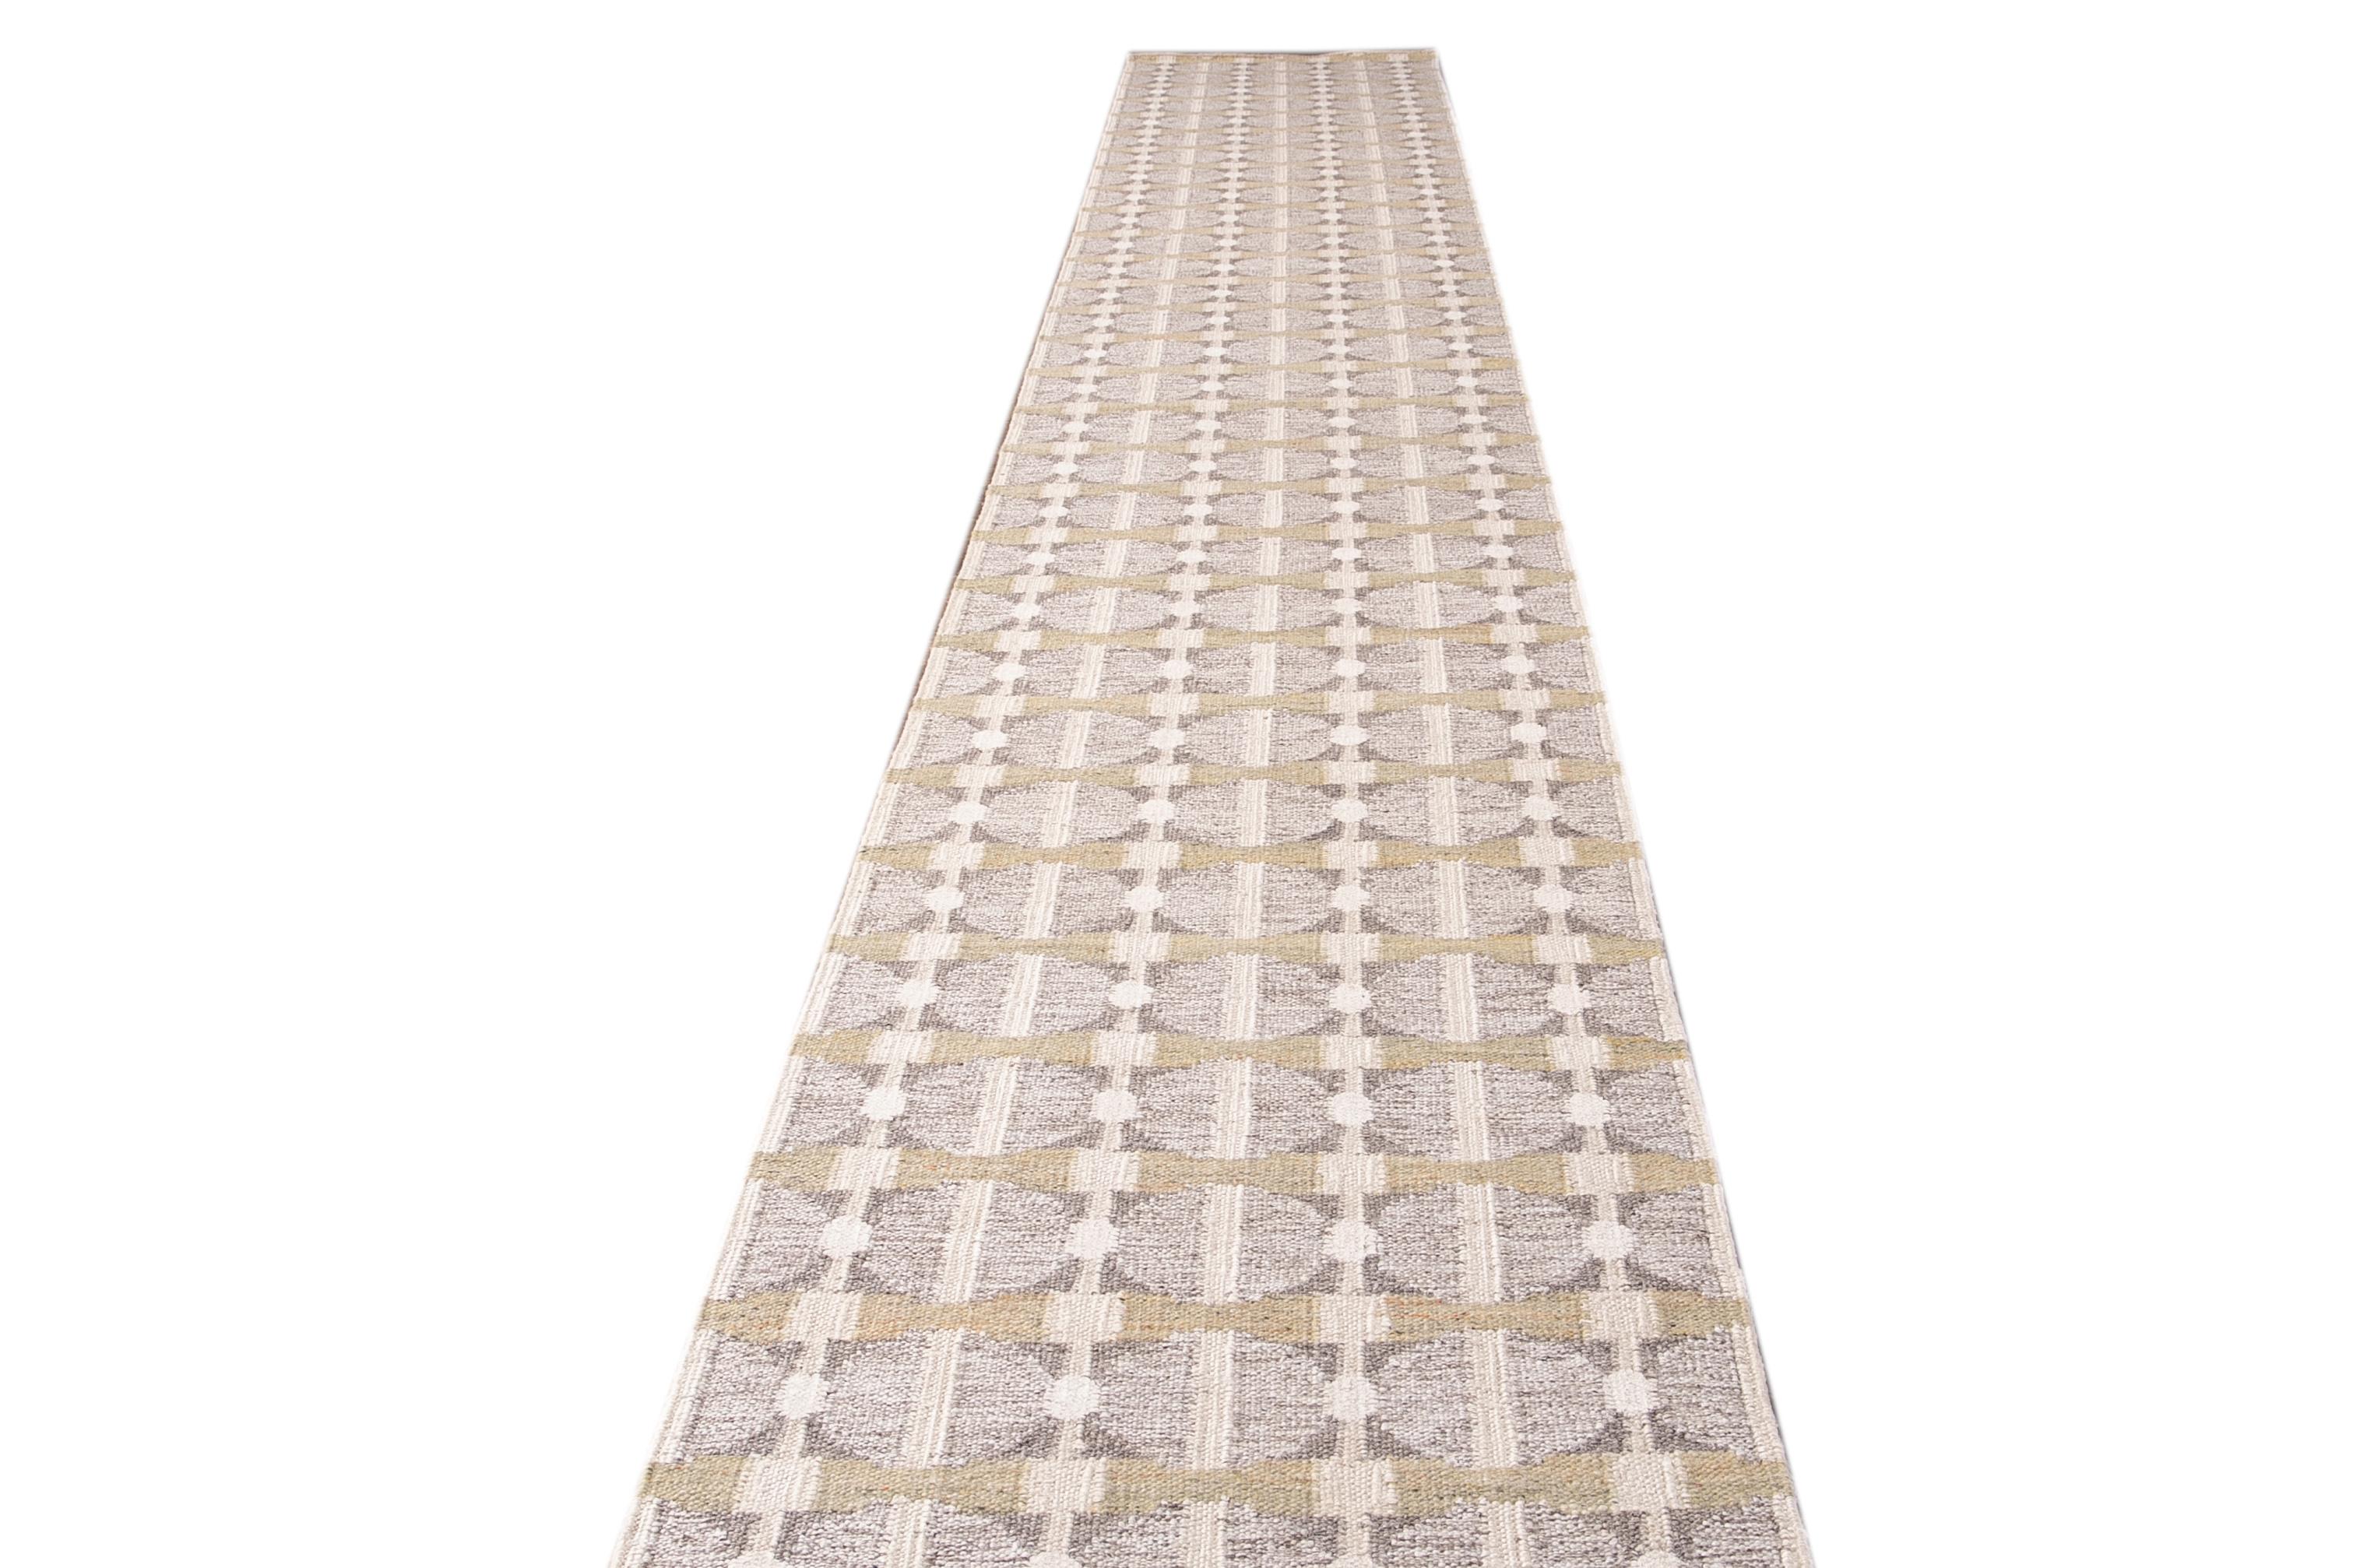 Beautiful modern long Swedish hand-knotted wool runner with a beige field. This Swedish runner has accents of gray and yellow in an all-over geometric abstract design.

This rug measures 2'11